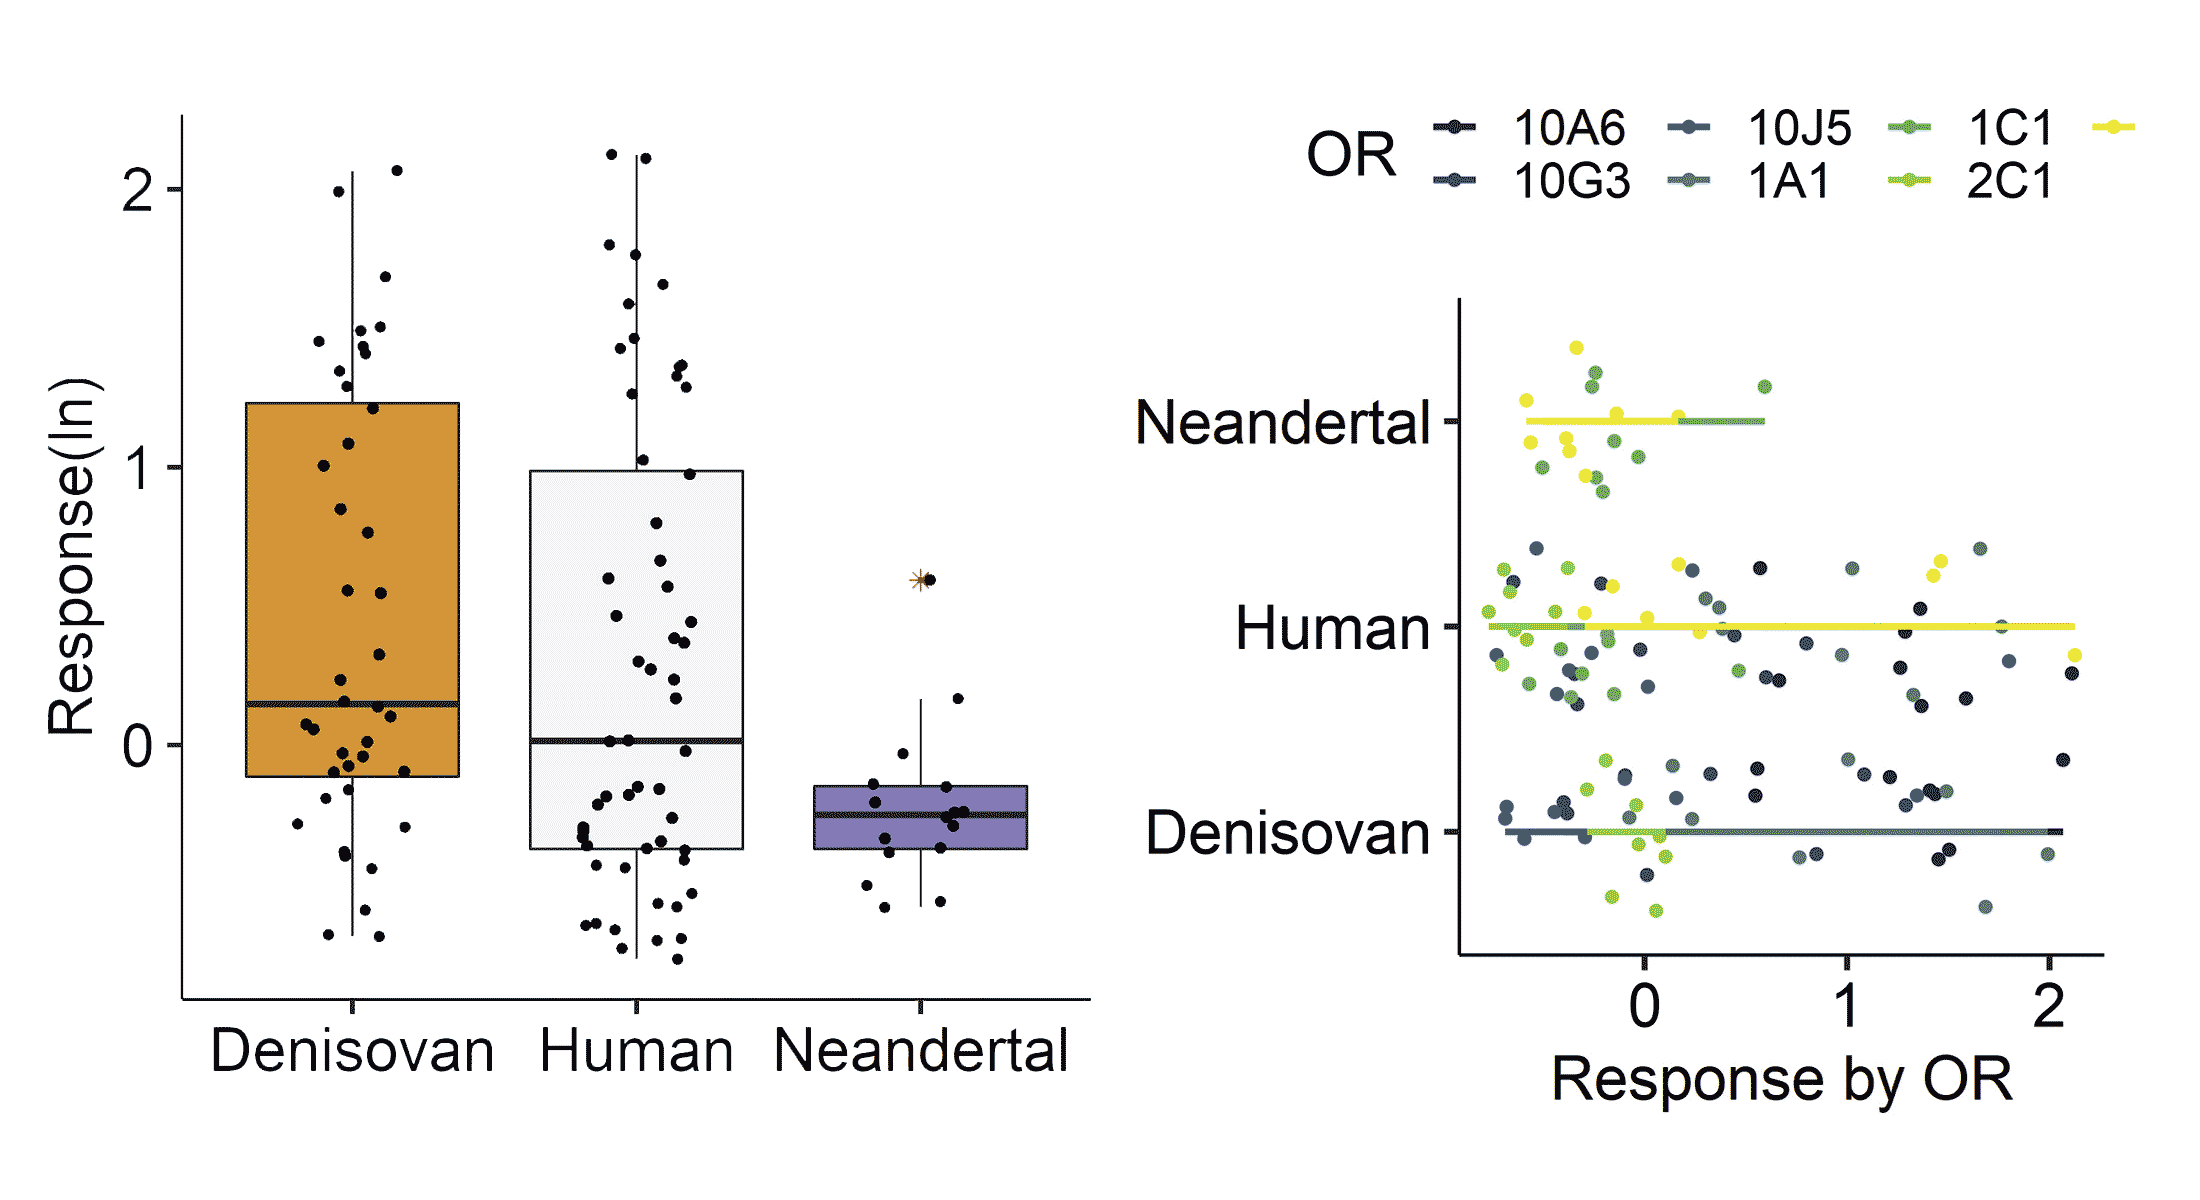 Two charts showing low response to odorant molecules for Neandertal missense variants compared to recent human and Denisovan variants.